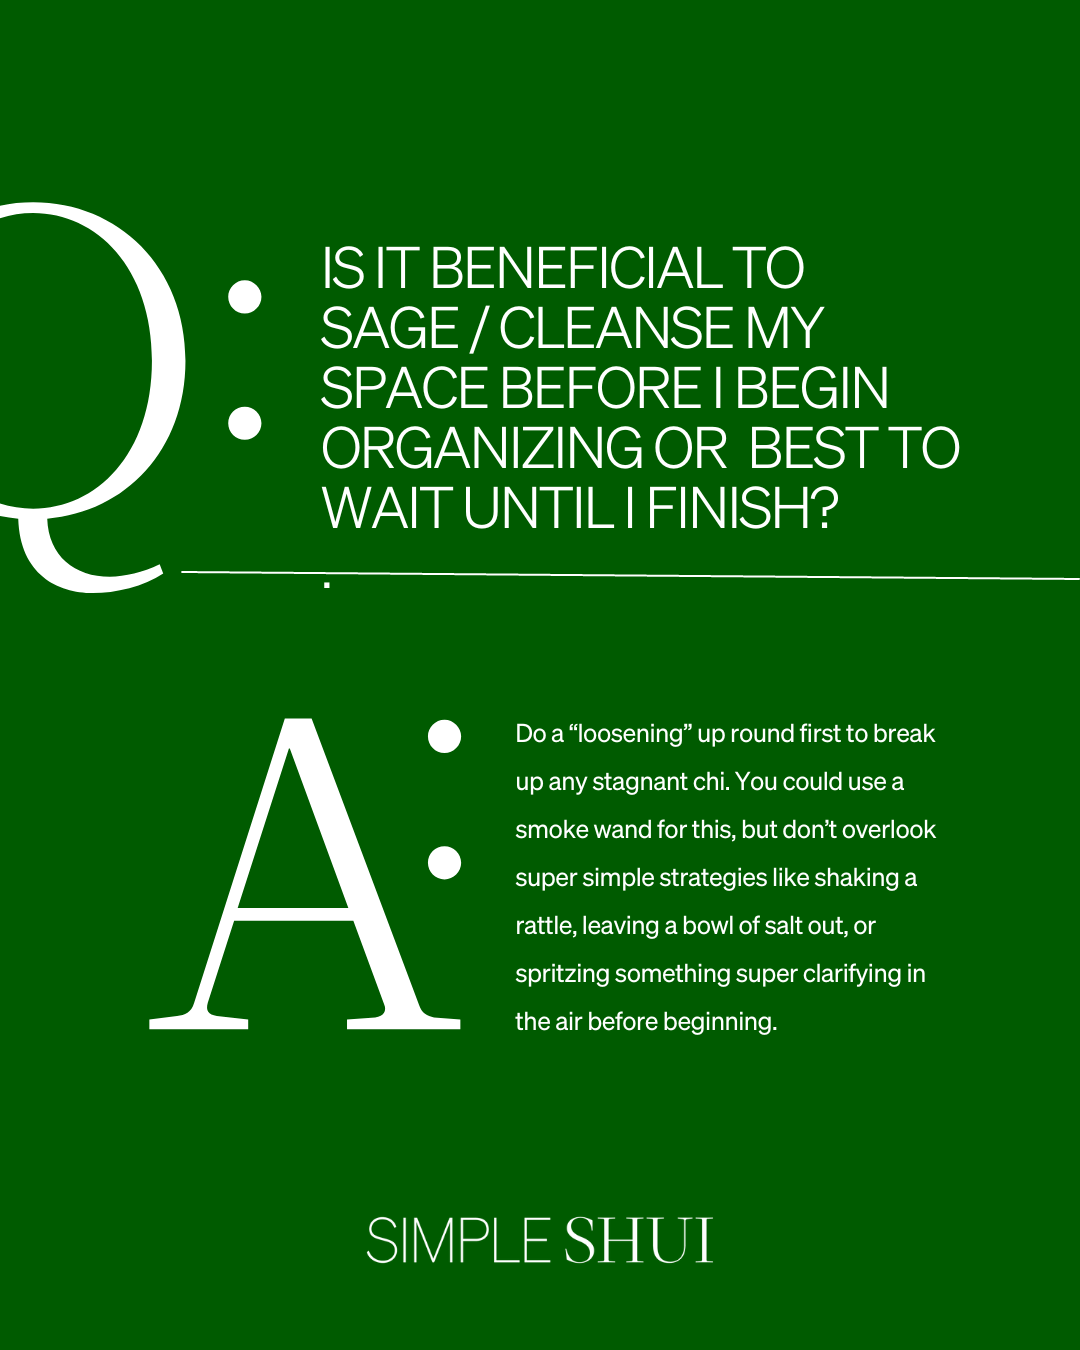 Q & A: do I sage my space before I begin organizing, or wait until I finish?